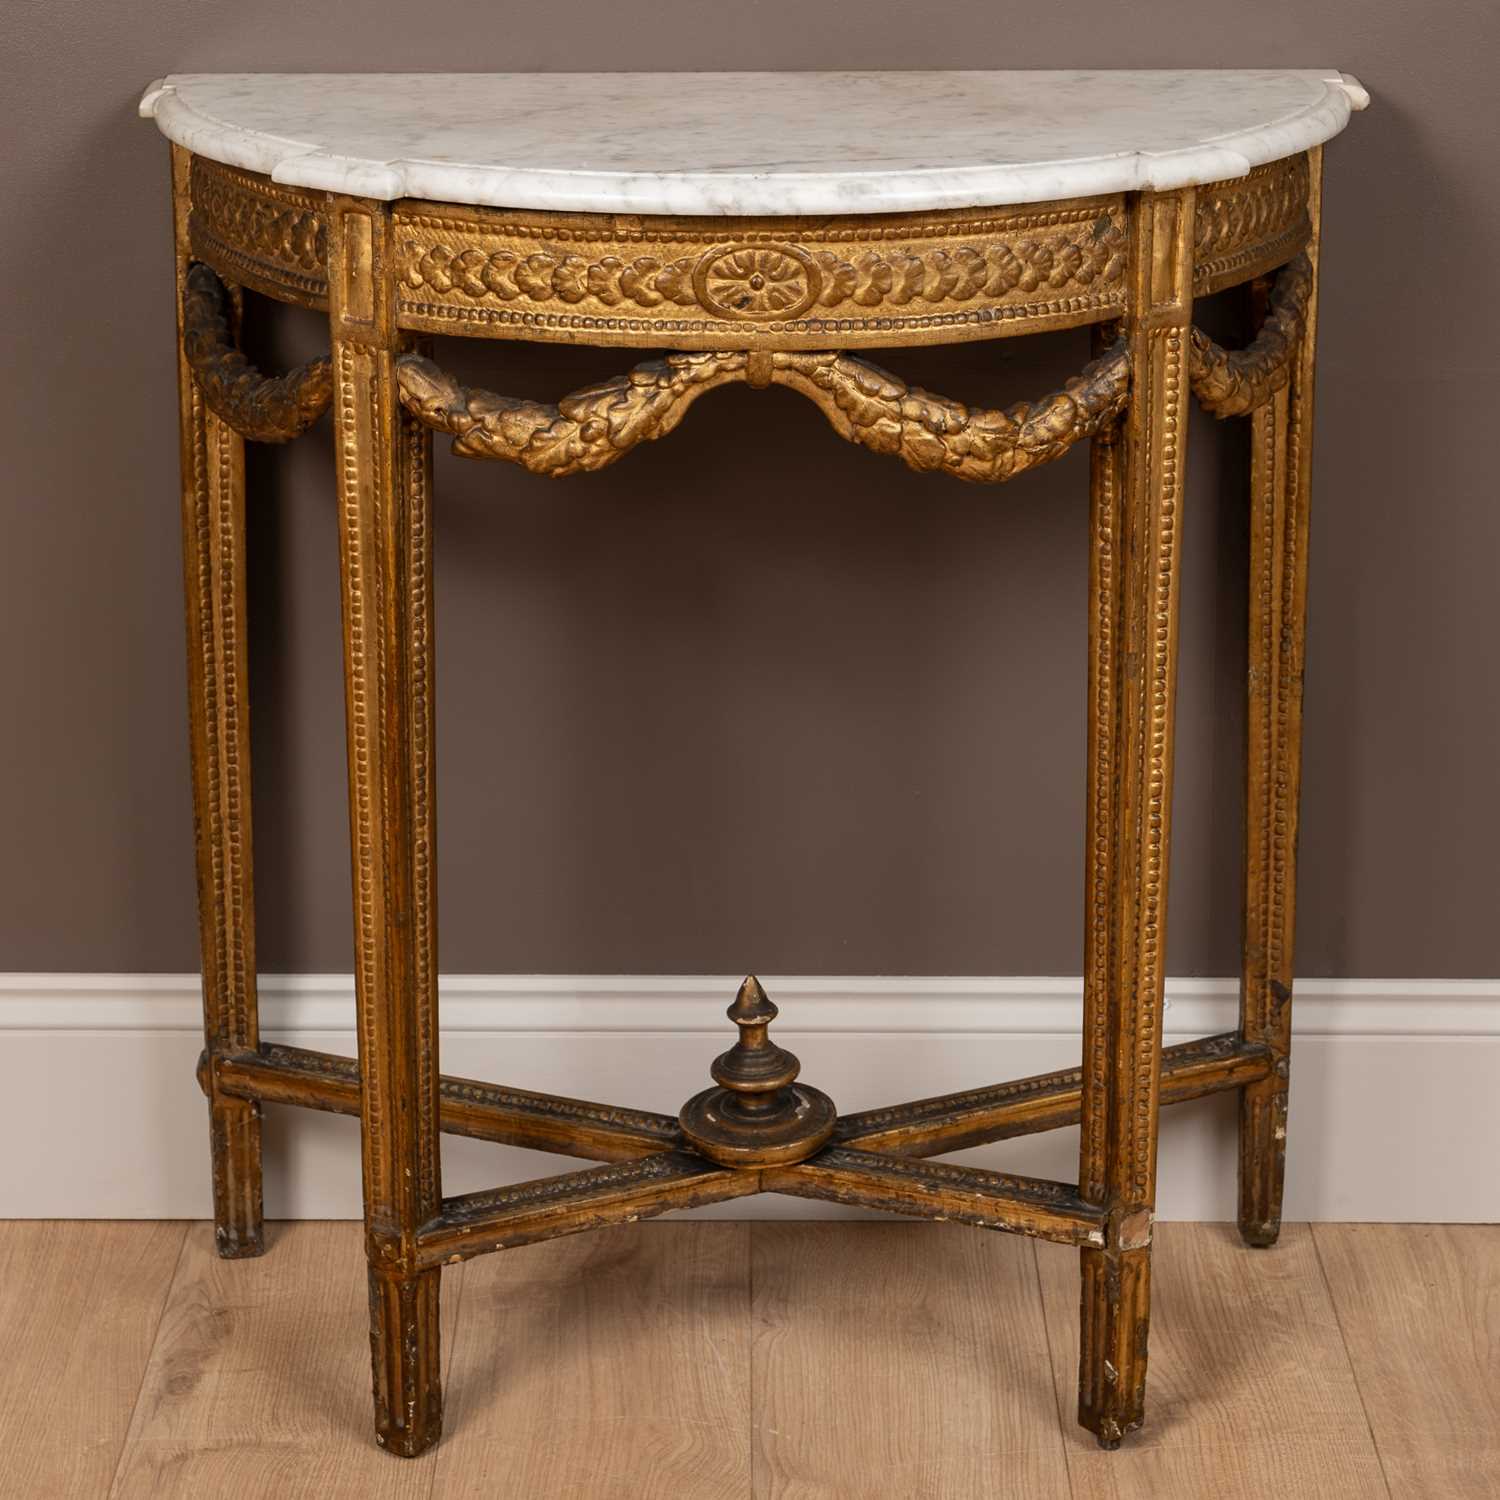 Lot 51 - A 19th century Continental gilt carved, wooden, gesso moulded, console table with a marble top